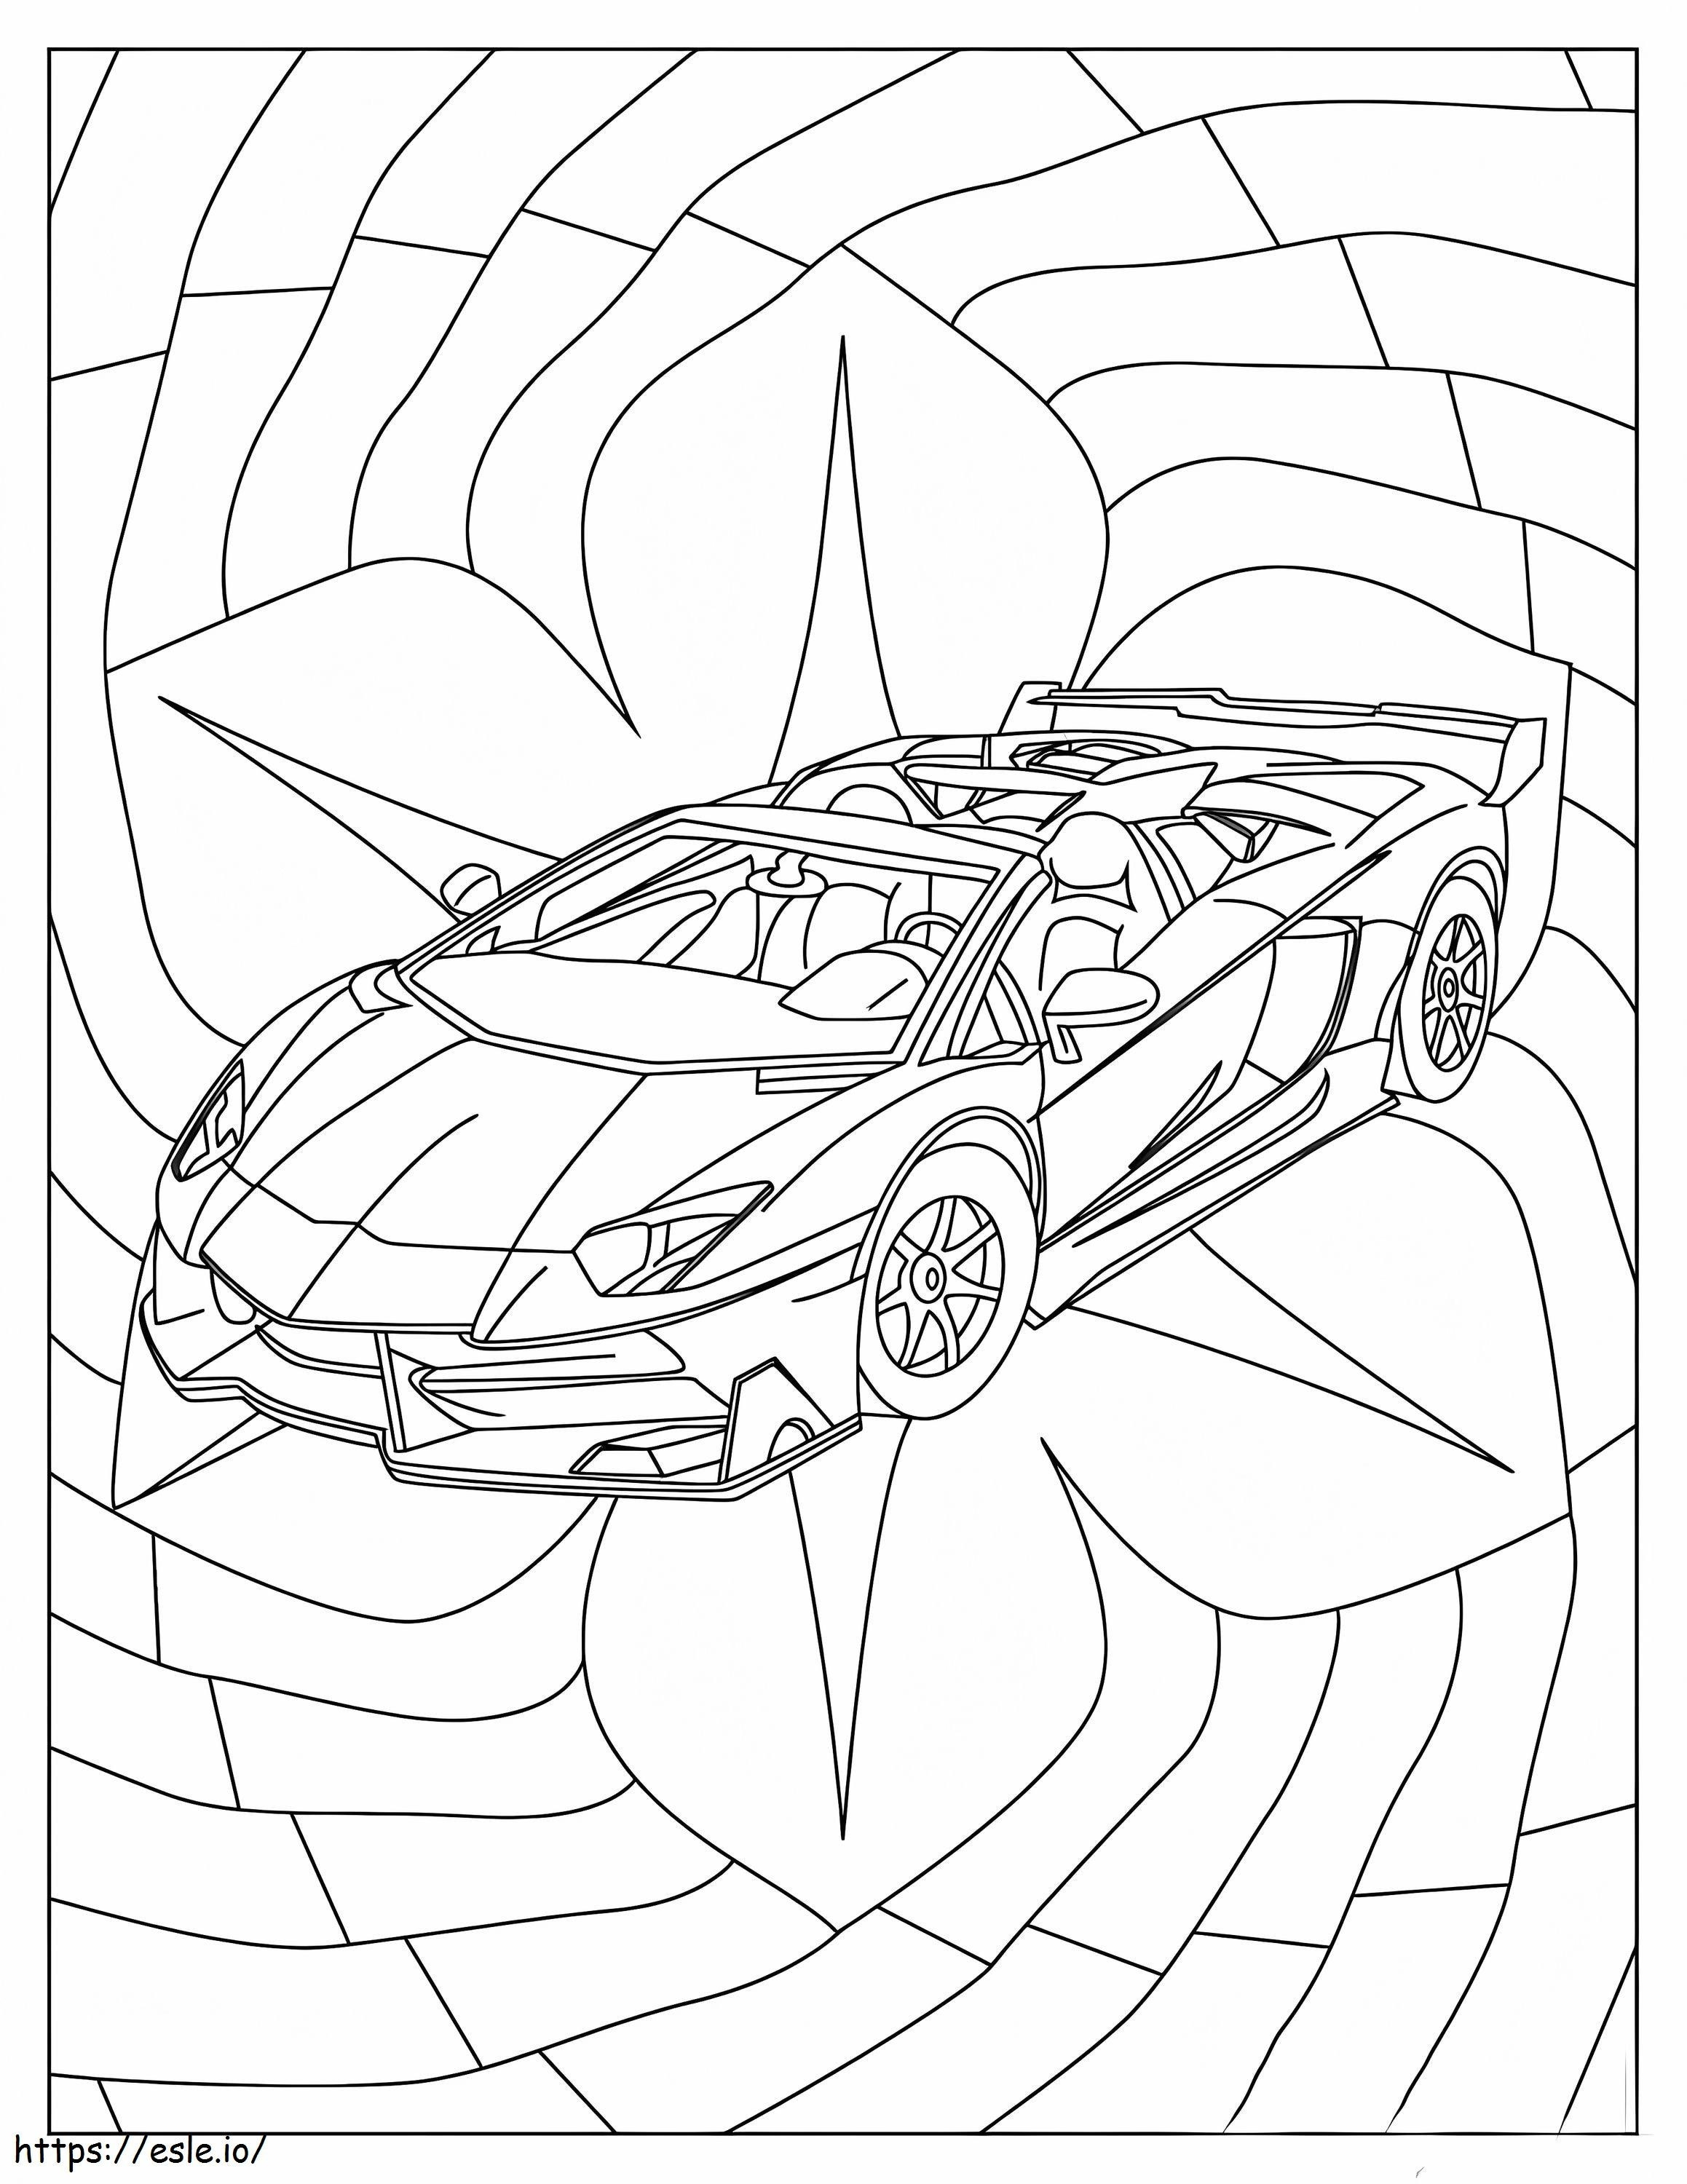 Lamborghini Is For Adults coloring page